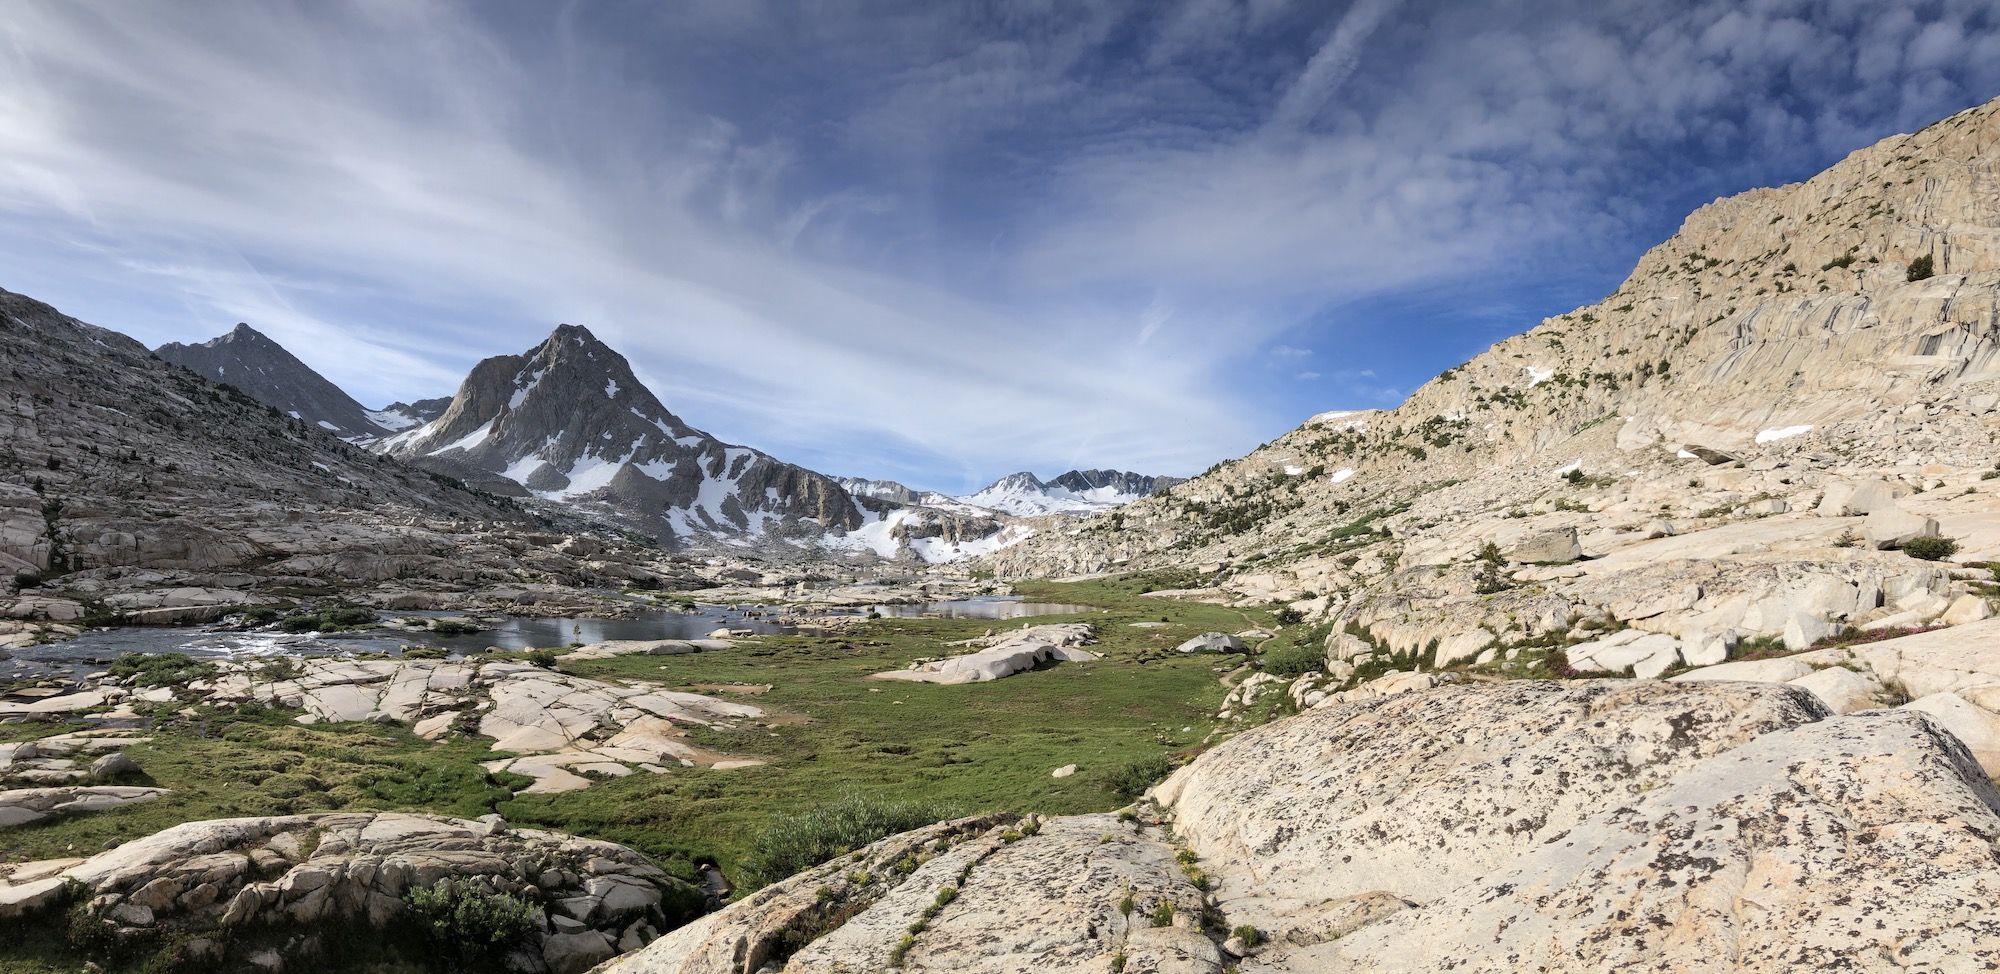 High alpine basin with small ponds and snow-covered mountains